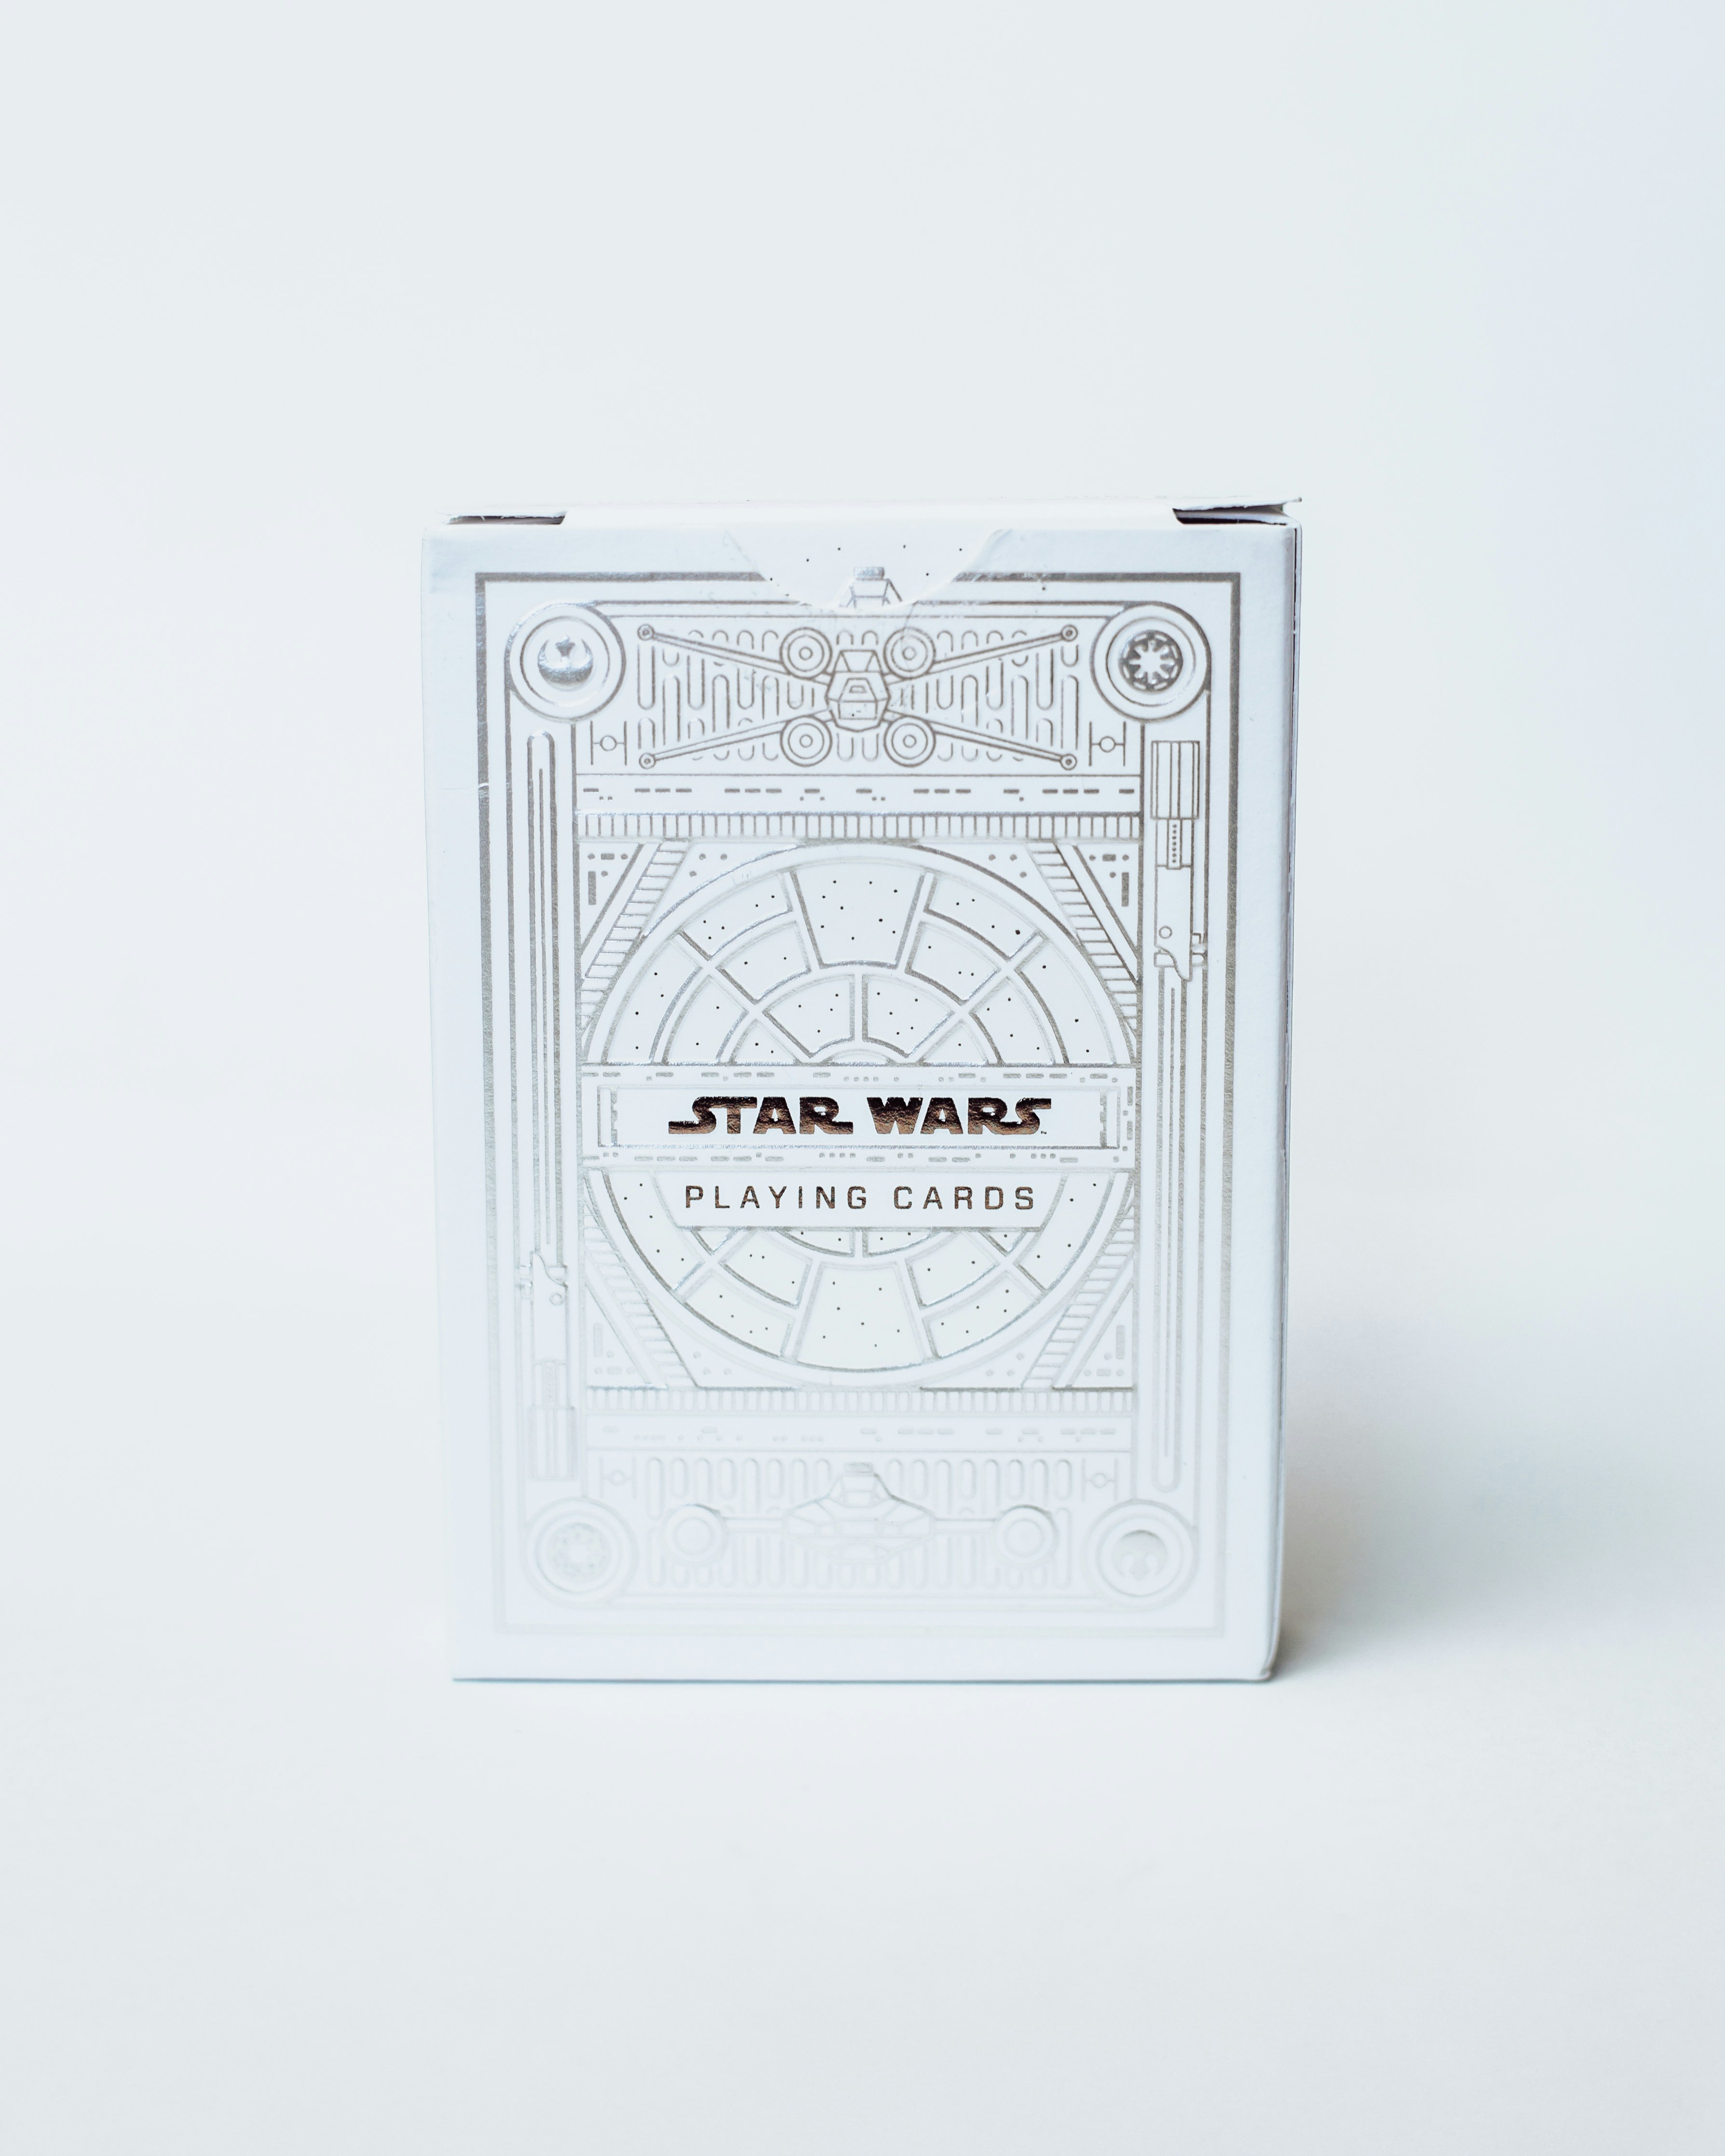 Theory 11 Star Wars Playing Cards